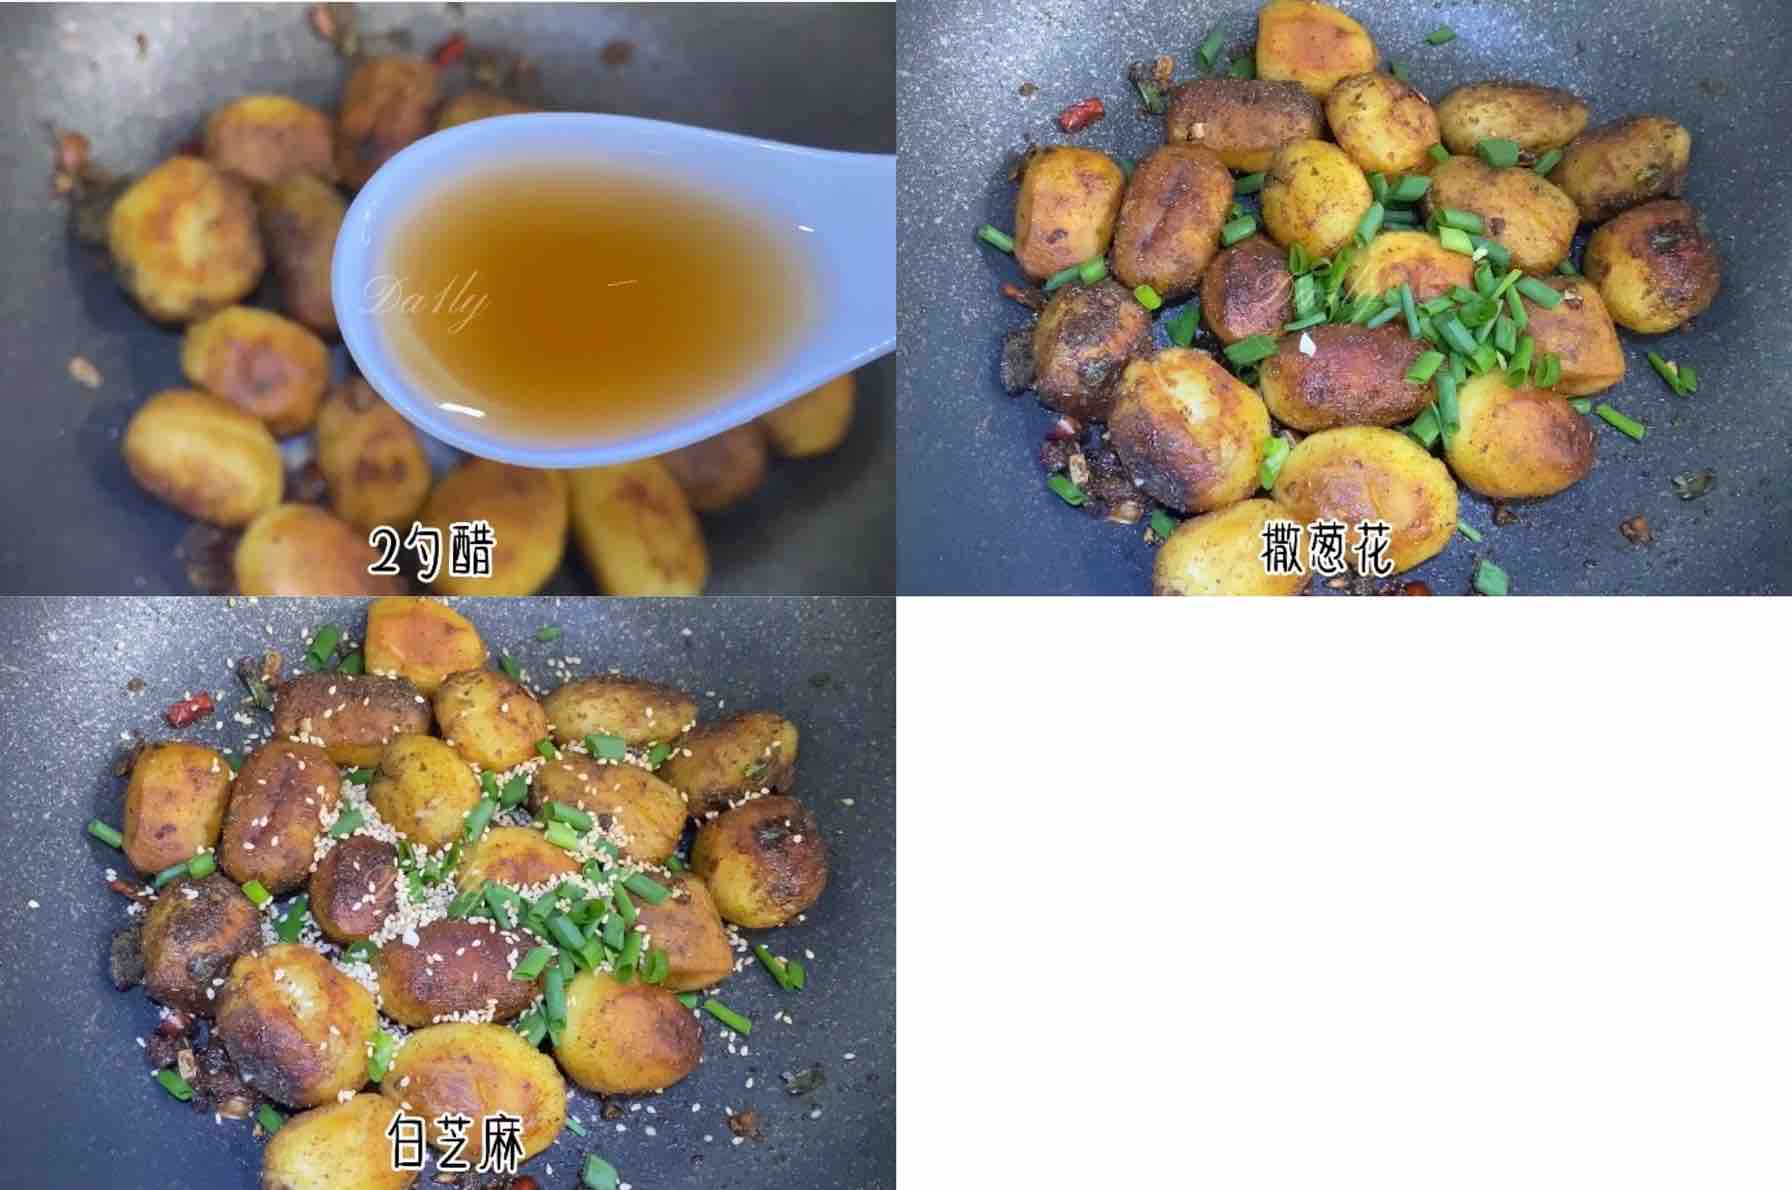 Crispy on The Outside and Sticky on The Inside, Kills The Pan-fried Small Potatoes at The Roadside Stall recipe